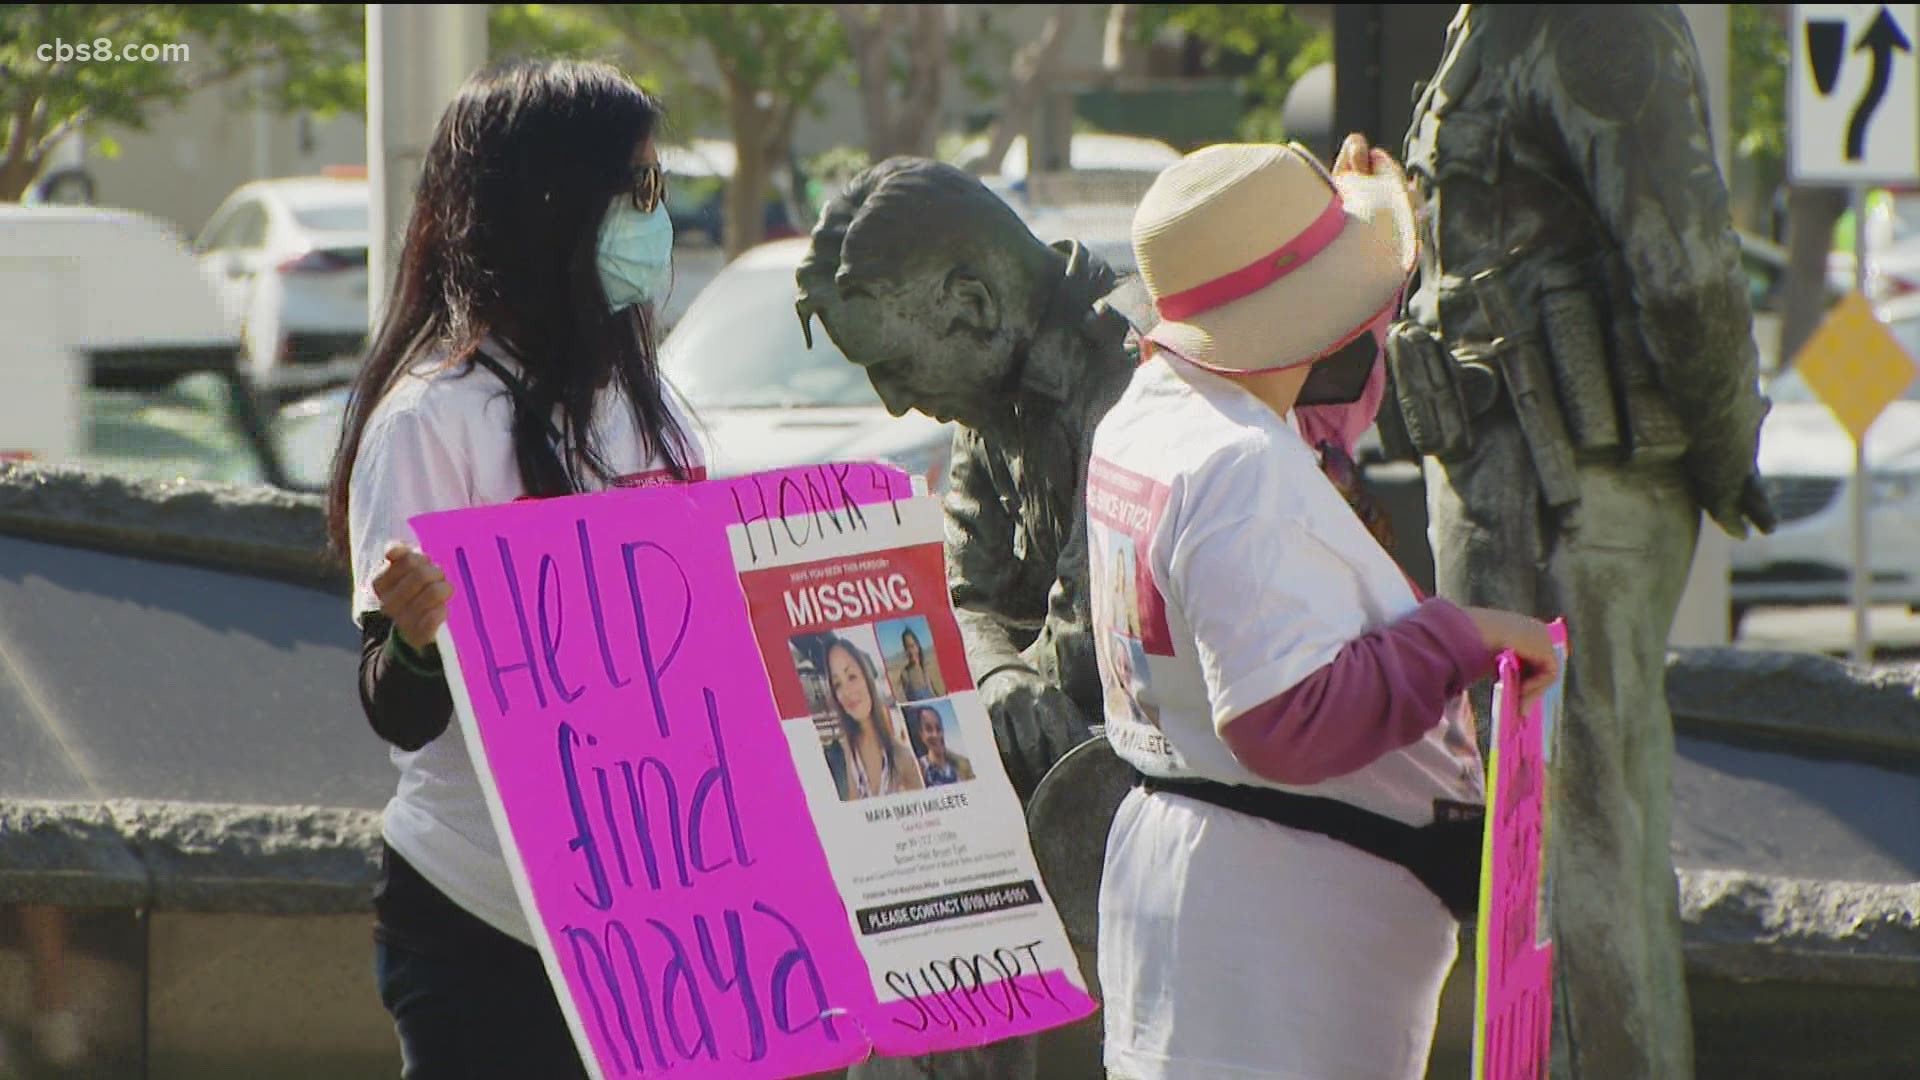 The family of Maya asked for people to "come together as a community to continue advocating for Maya in a peaceful rally at the Chula Vista PD" on Tuesday.